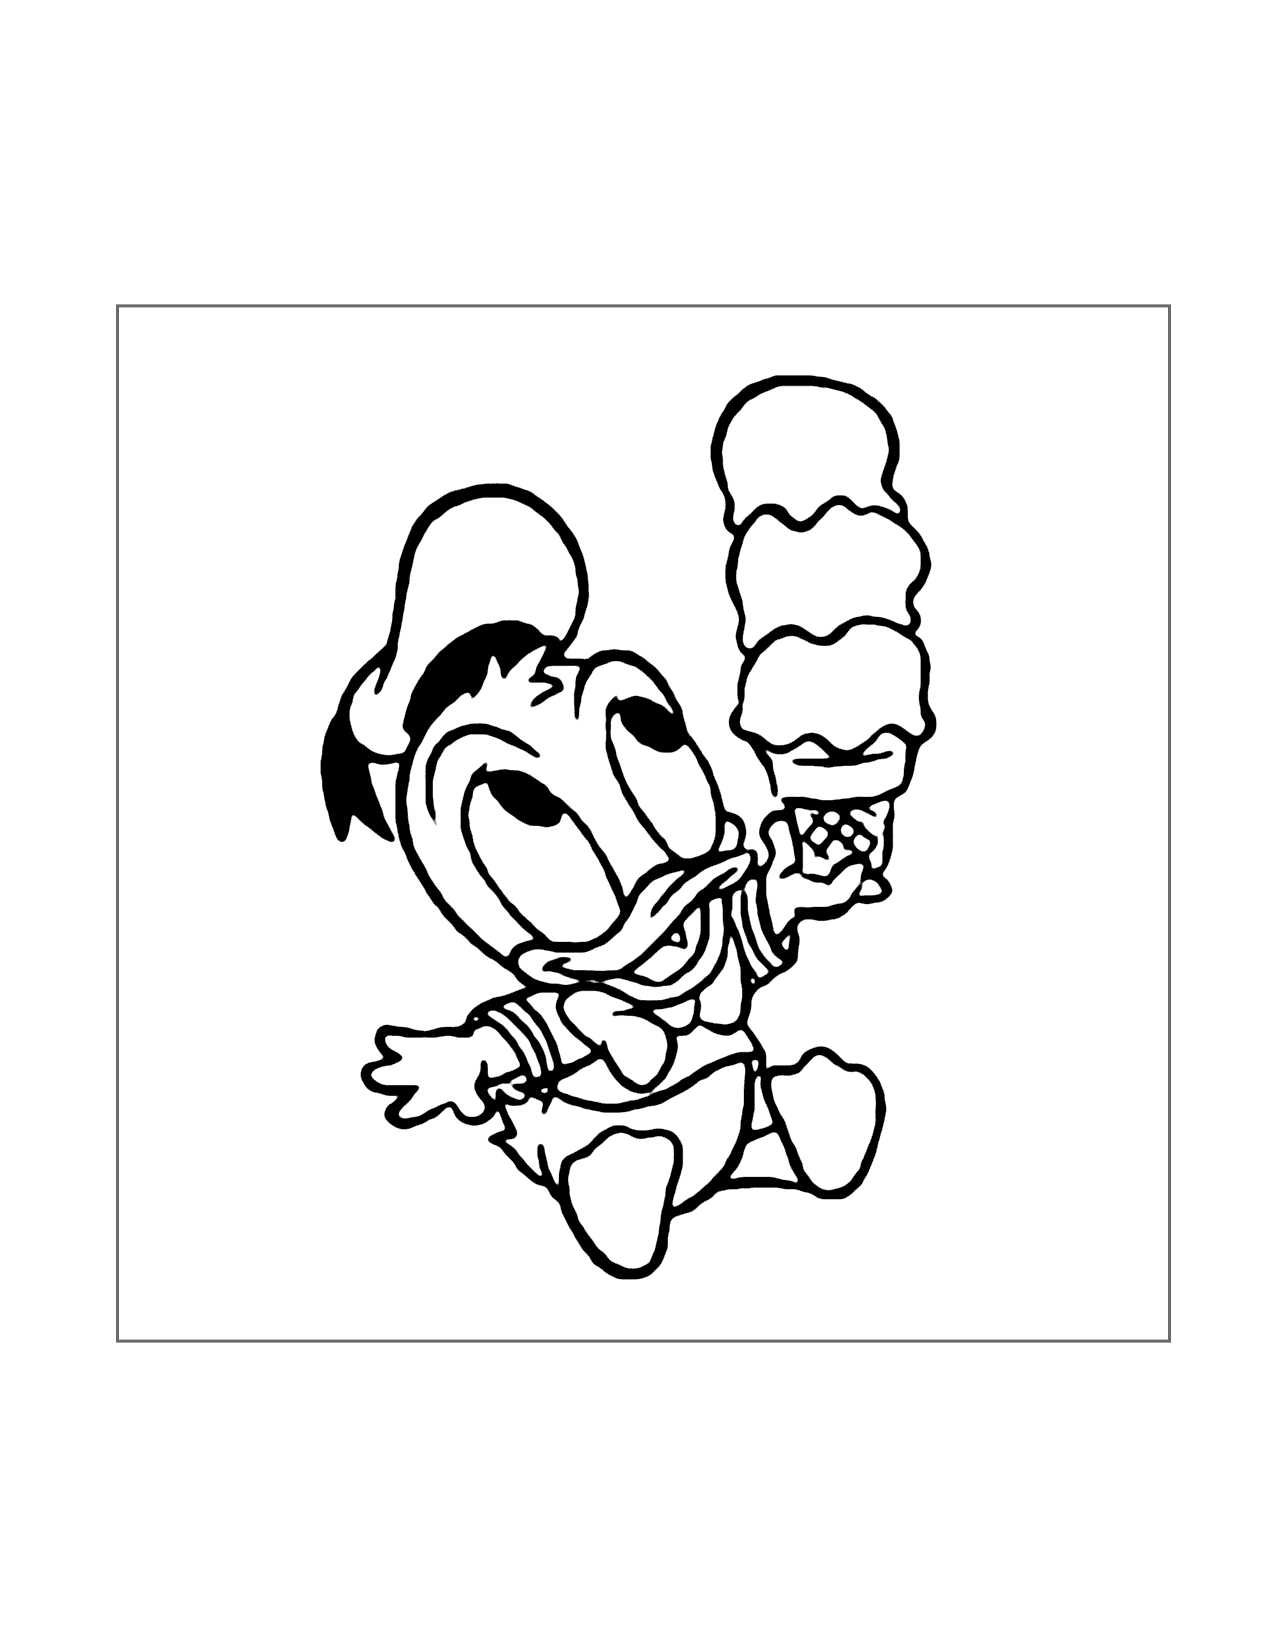 Baby Donald Duck Coloring Page